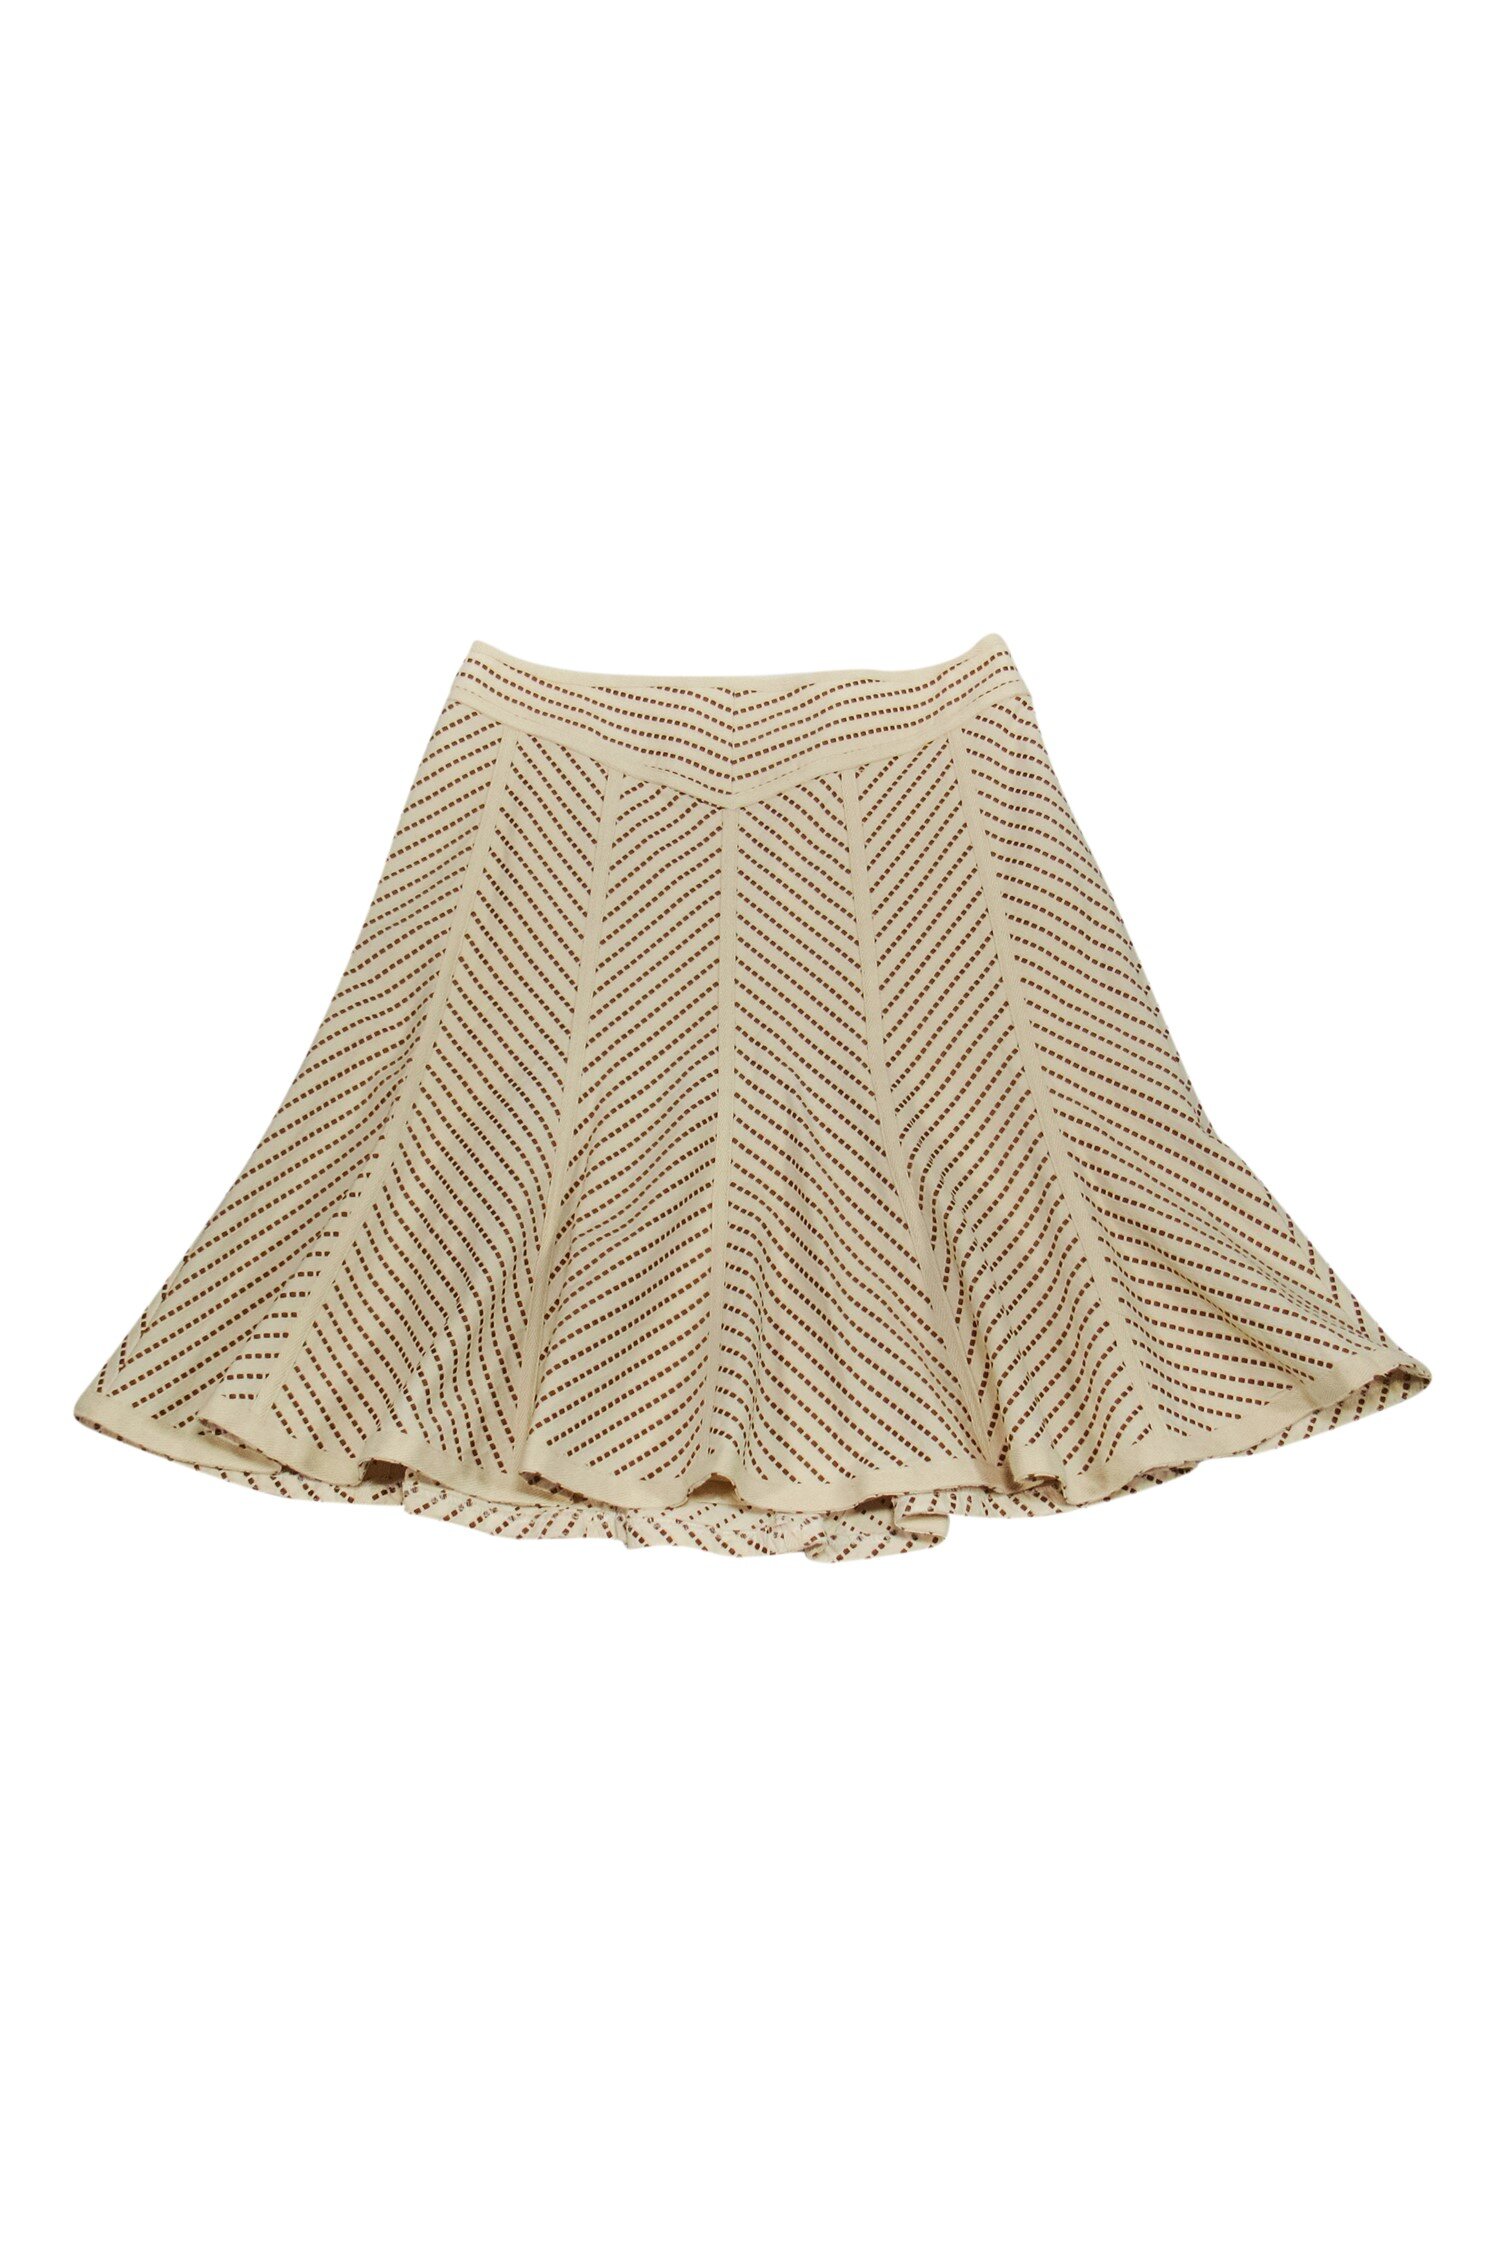 Nanette Lepore Striped Fit and Flare Skirt — UFO No More